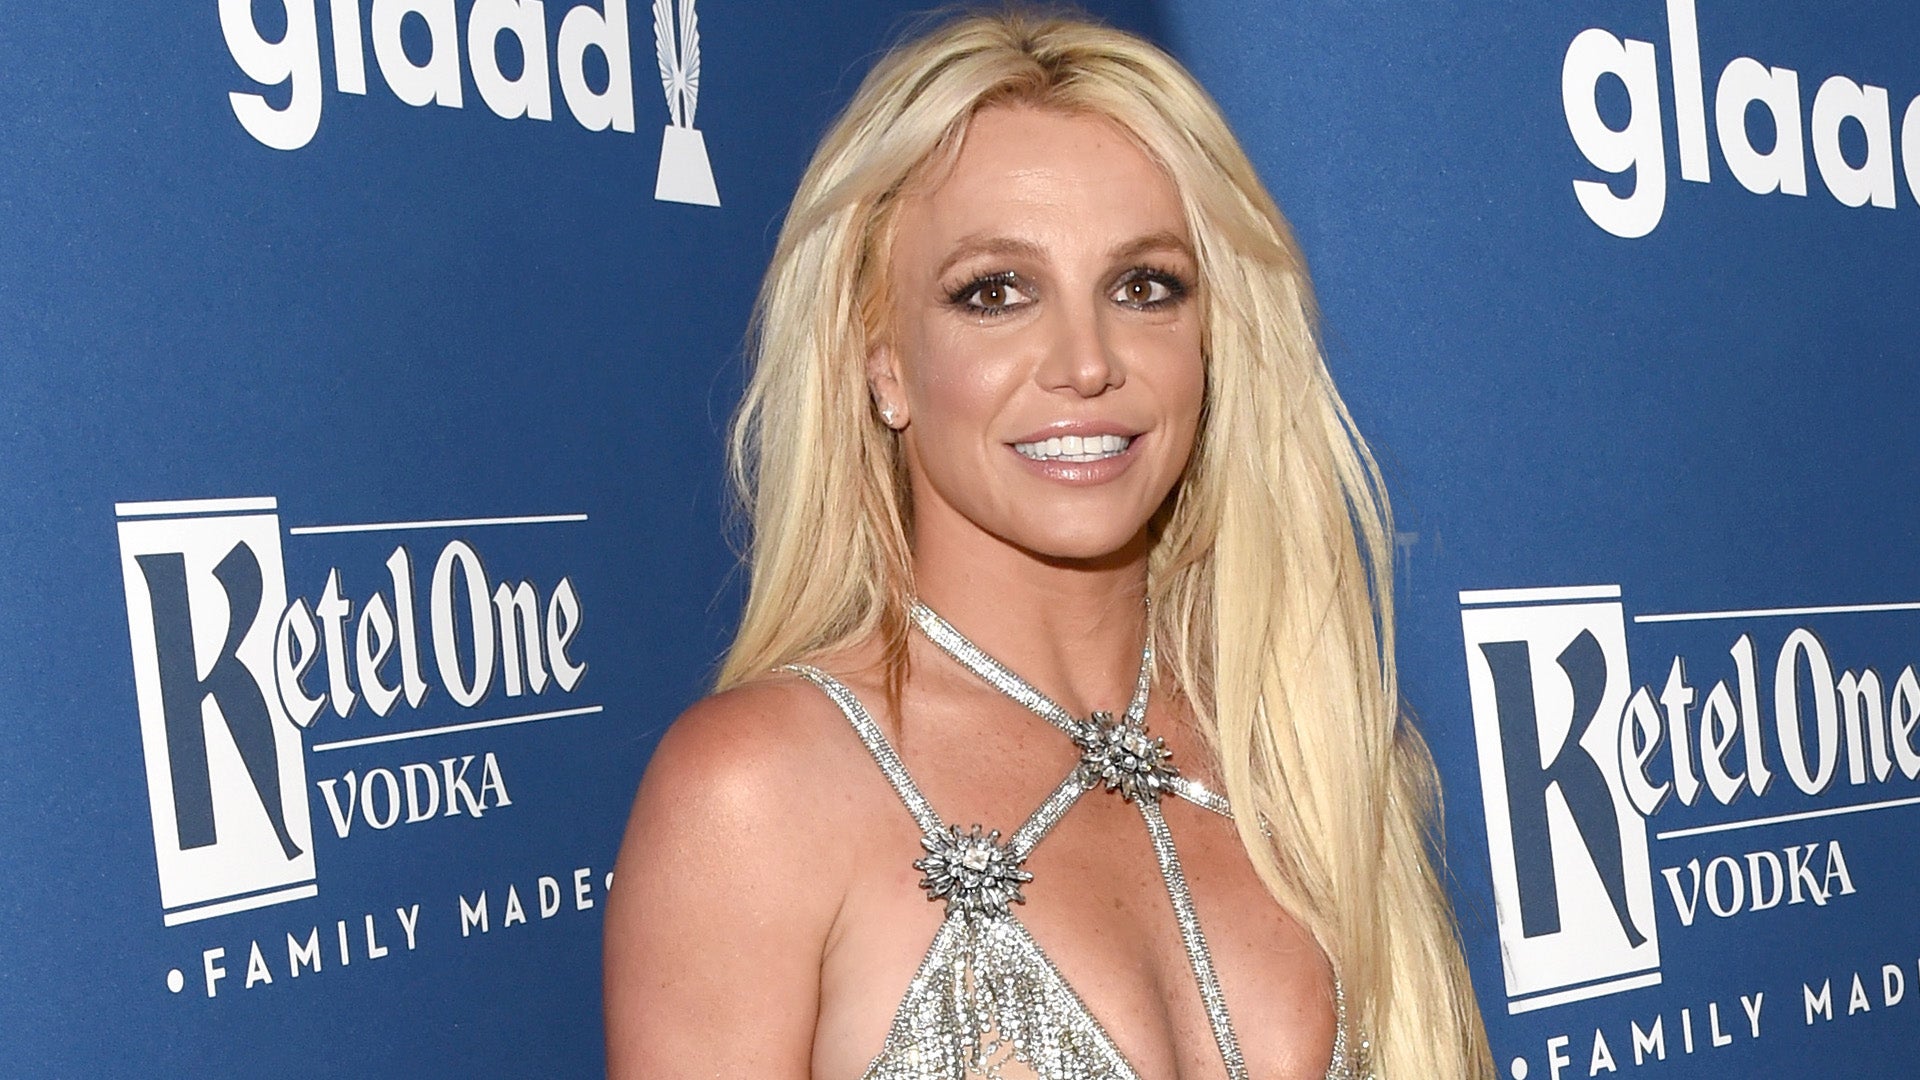 Britney Spears’ Memoir Getting Biopic Treatment: What We Know About the Movie